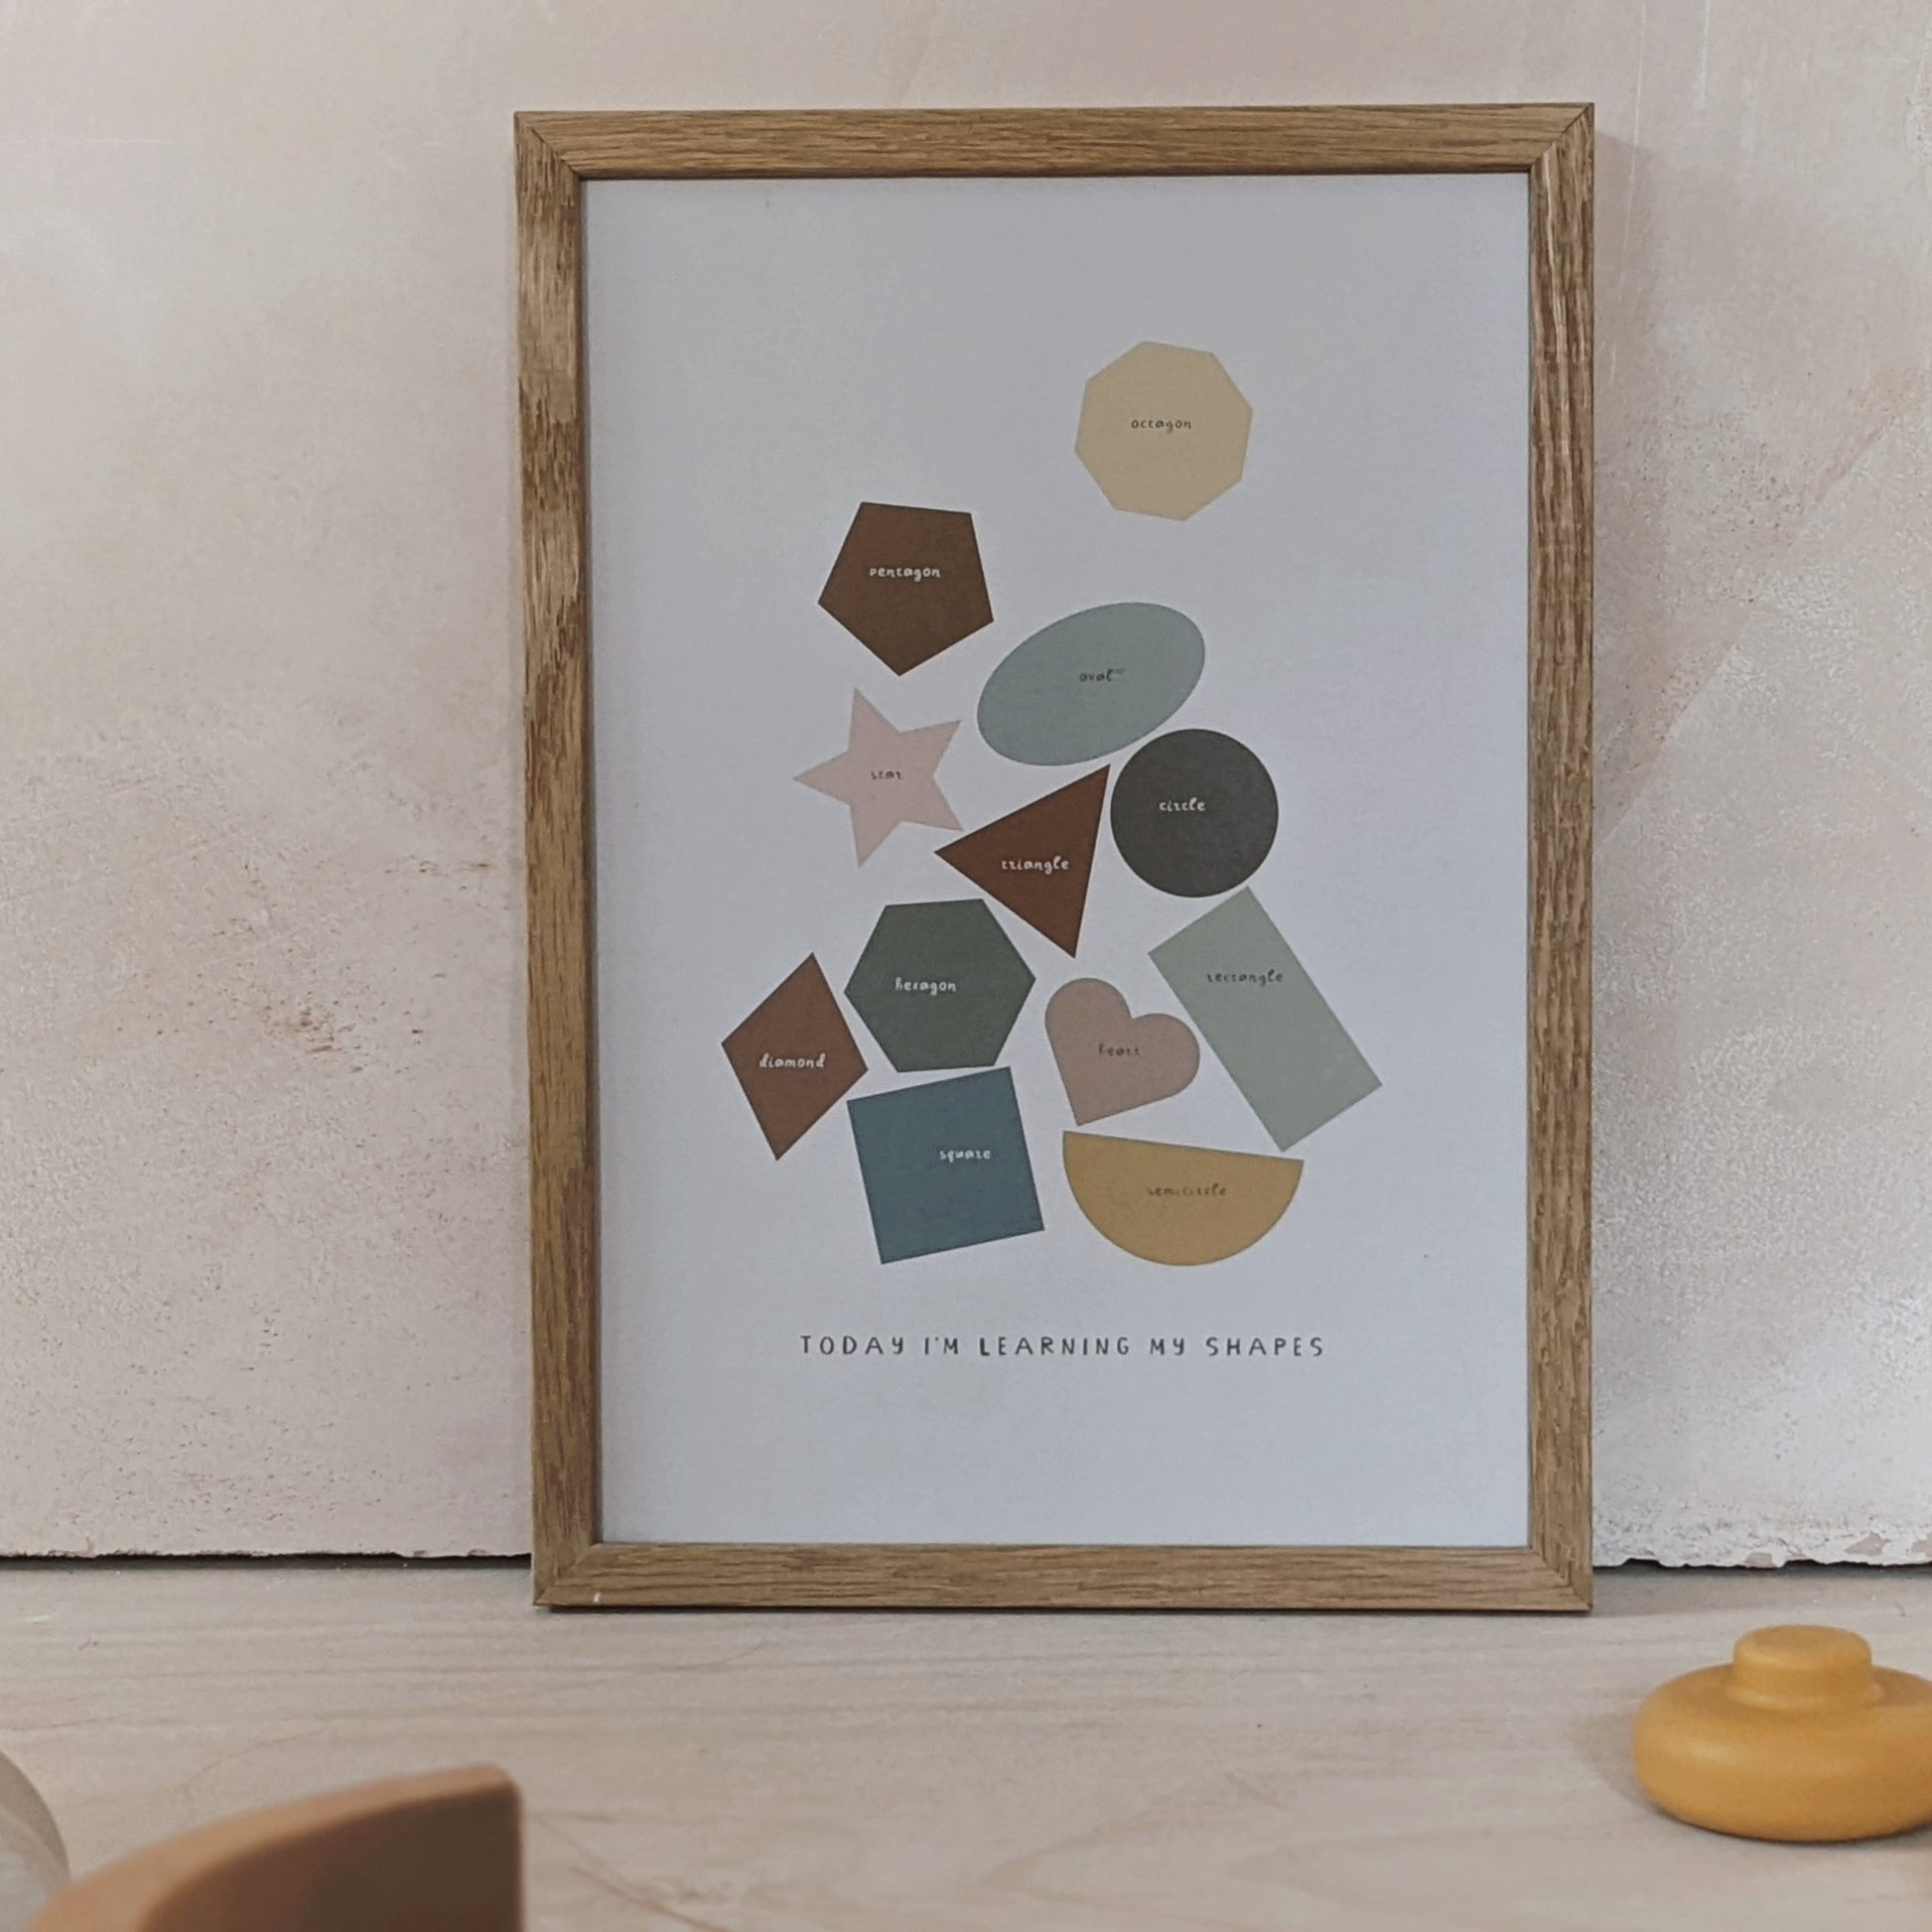 'Today I'm Learning My Shapes' Art Print by Paper & Bean